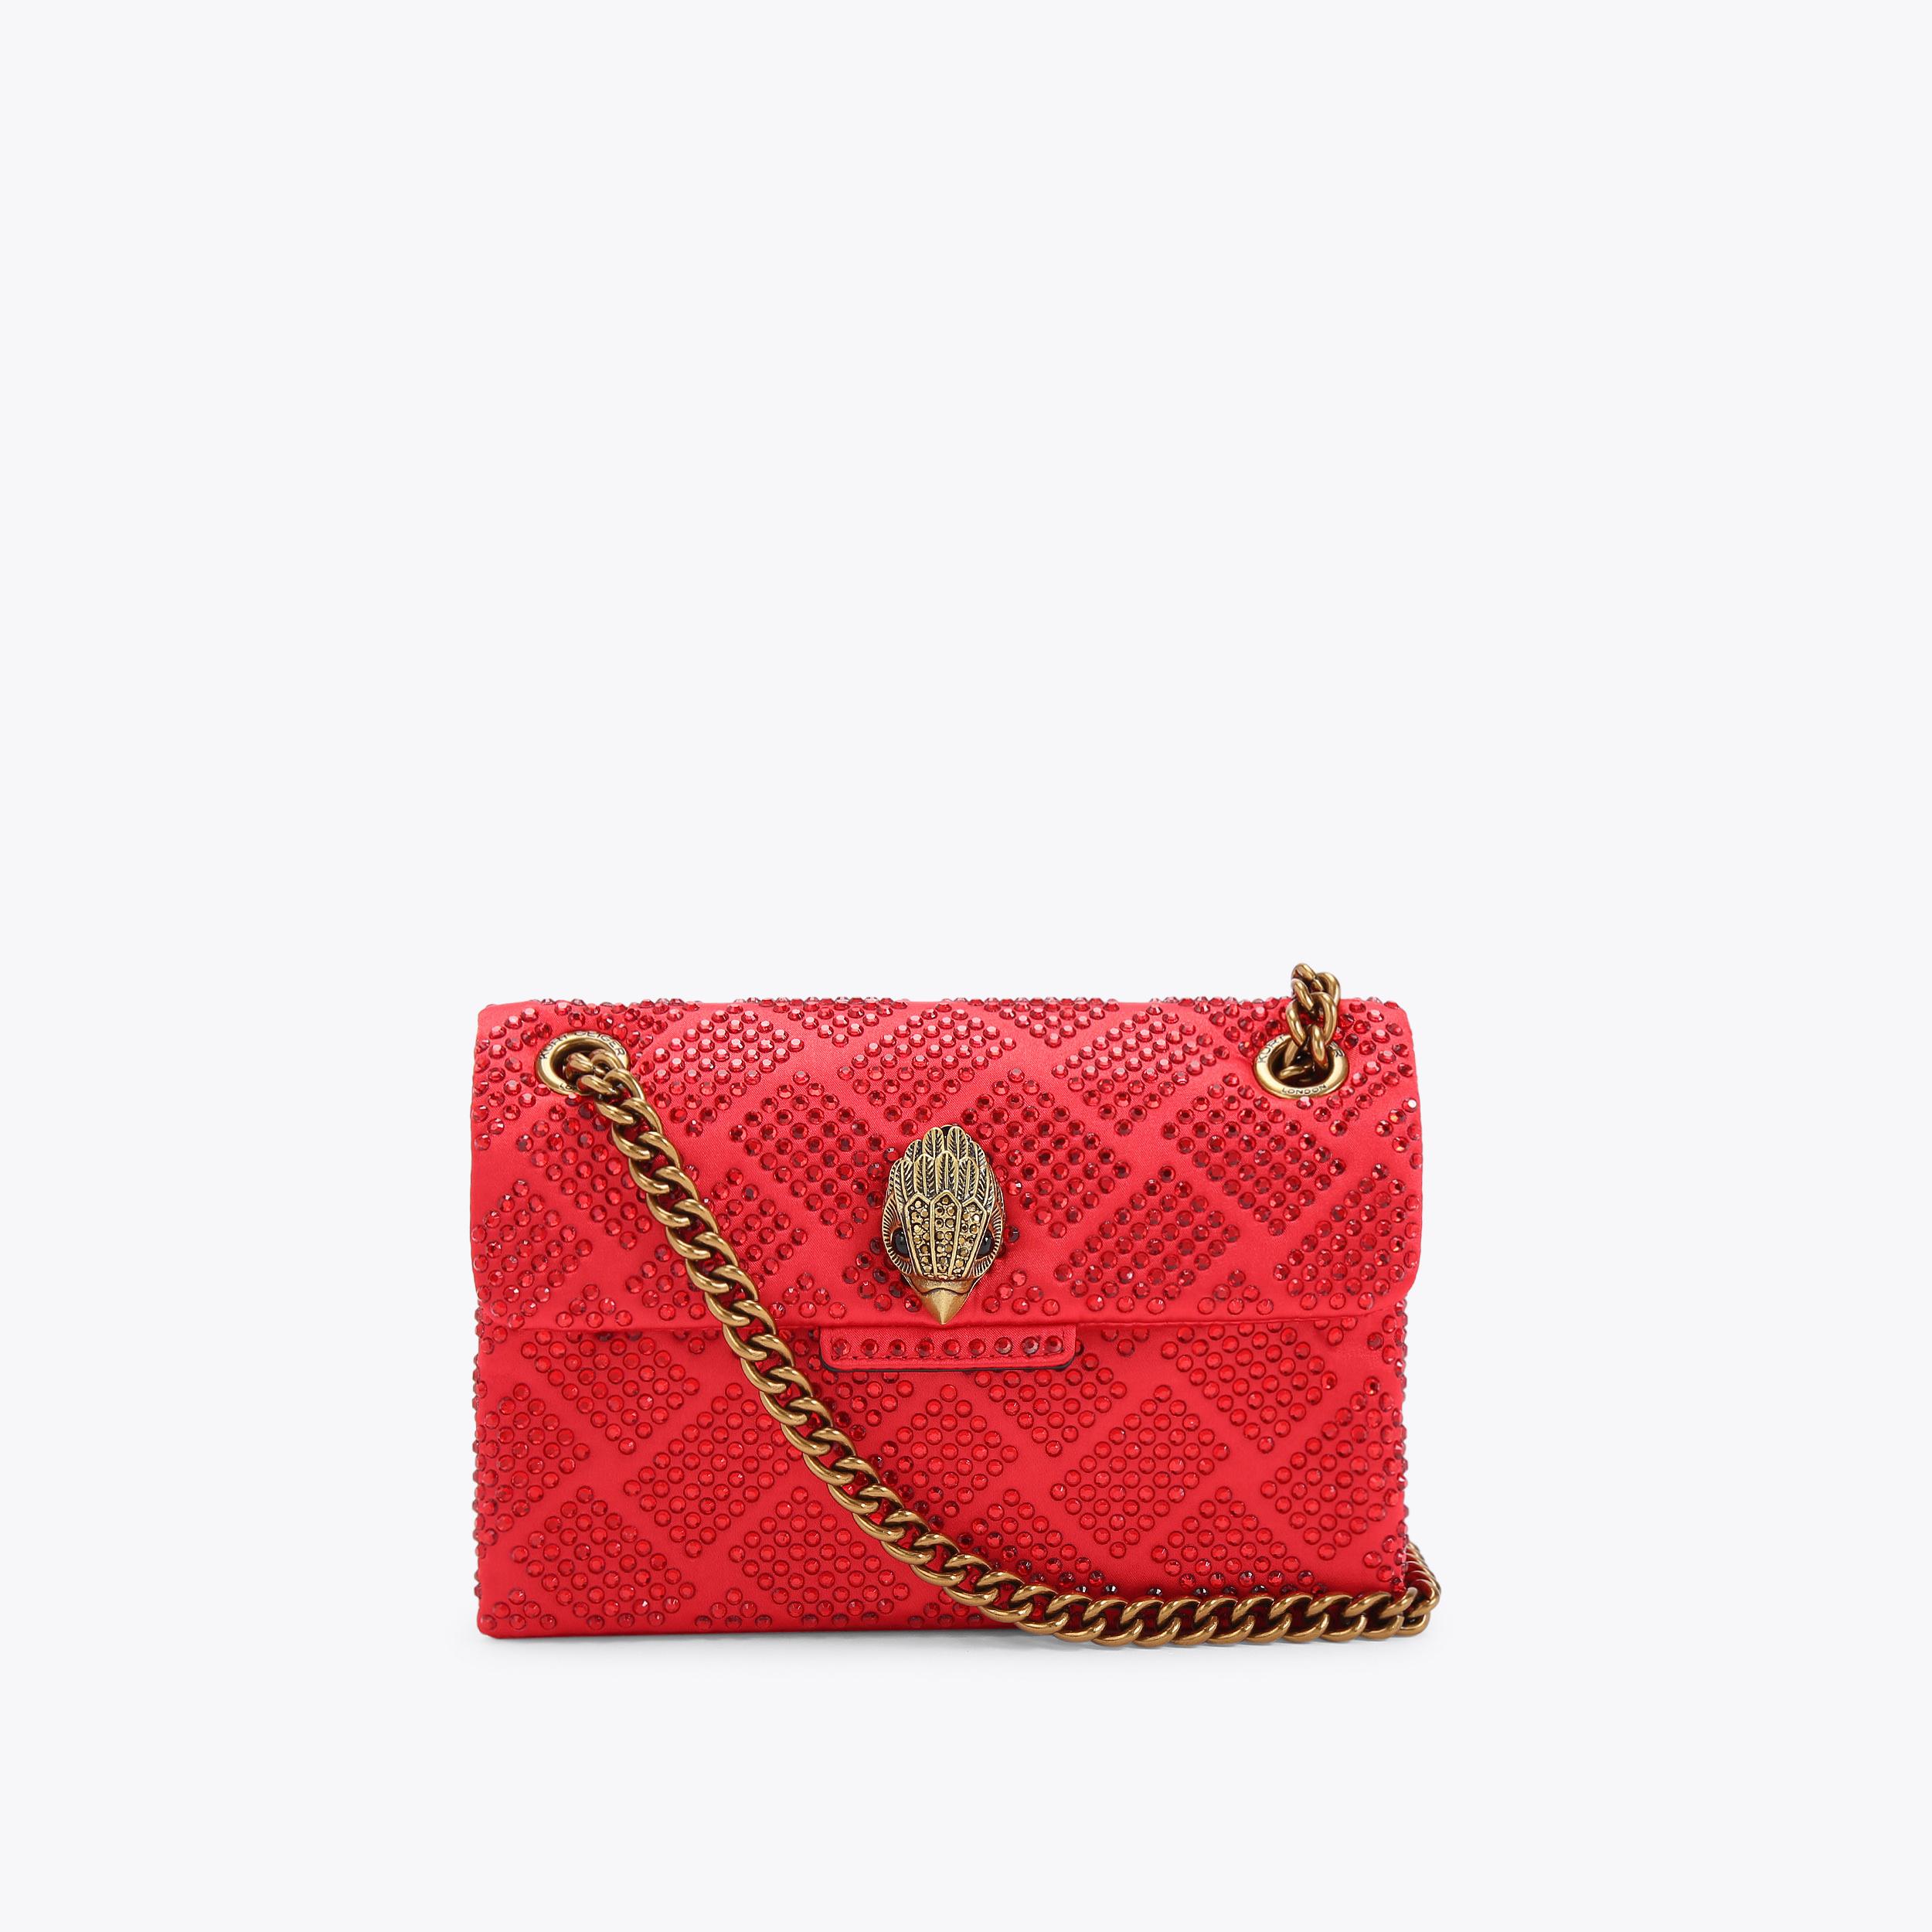 FABRIC MINI KENSINGTON Red Crystal Quilted Cross Body Bag by KURT ...